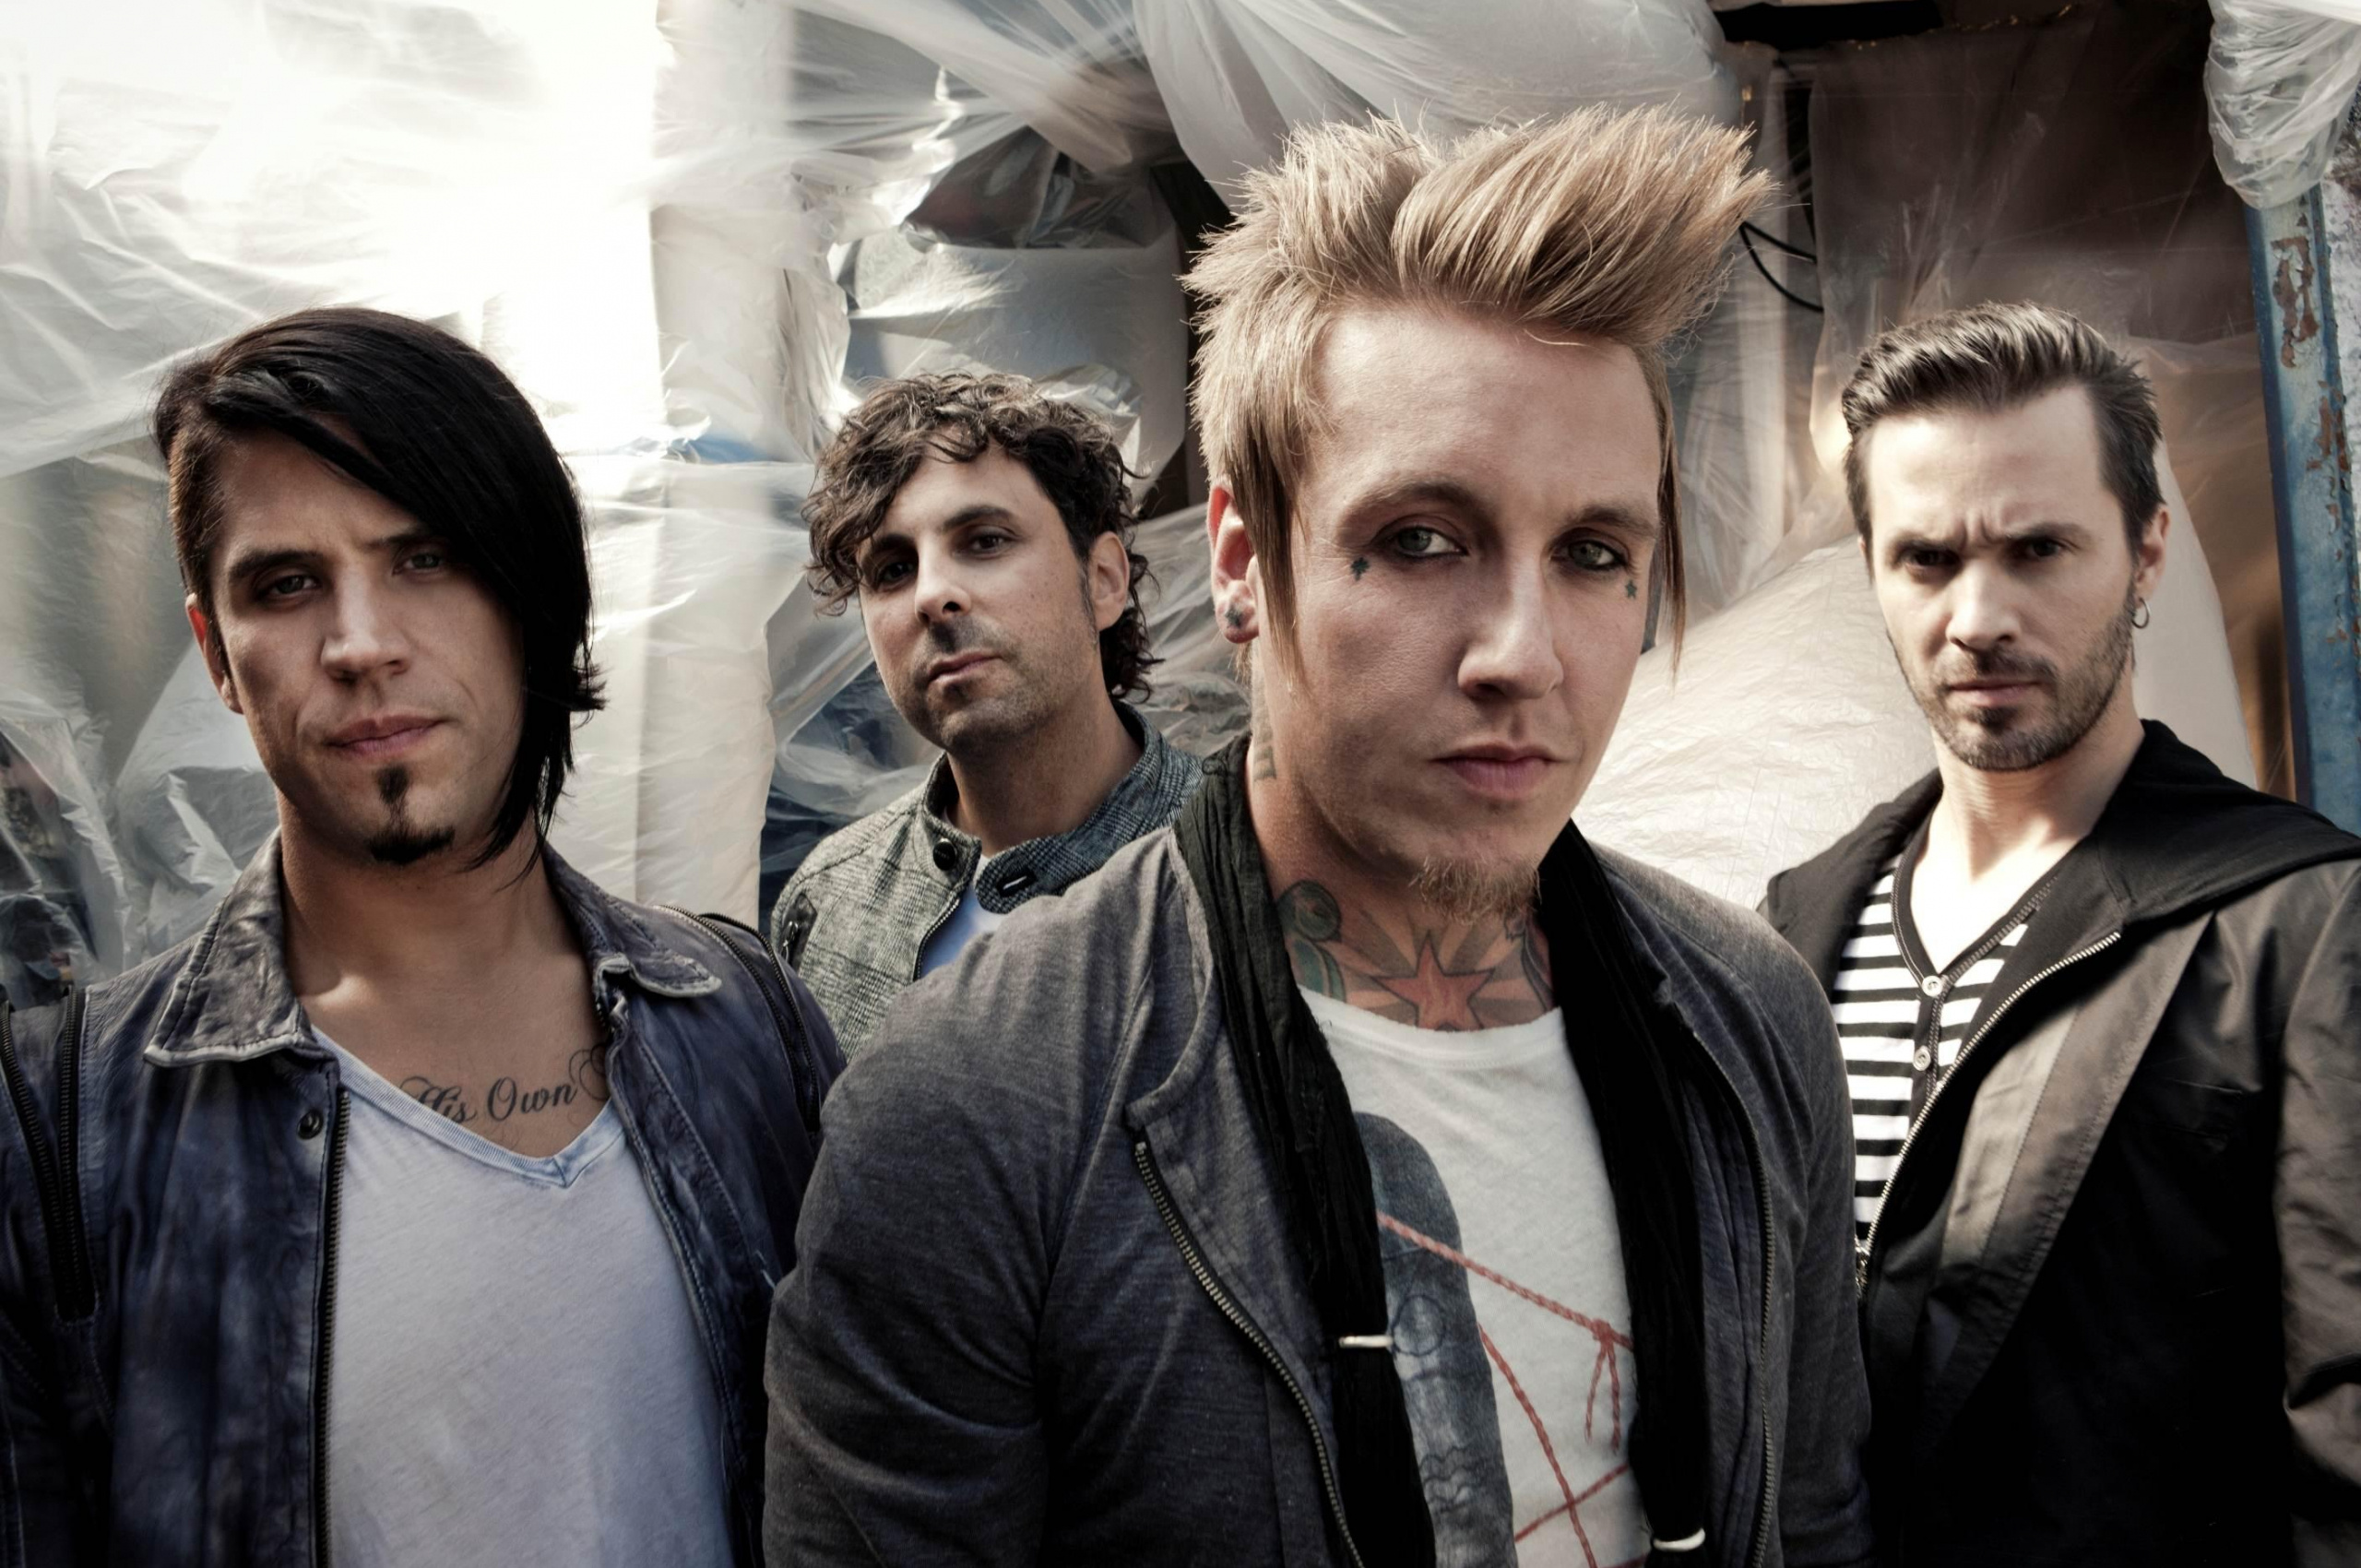 Jacoby Shaddix, Revealing his firsts, Personal memories, Exclusive interview, 2560x1700 HD Desktop